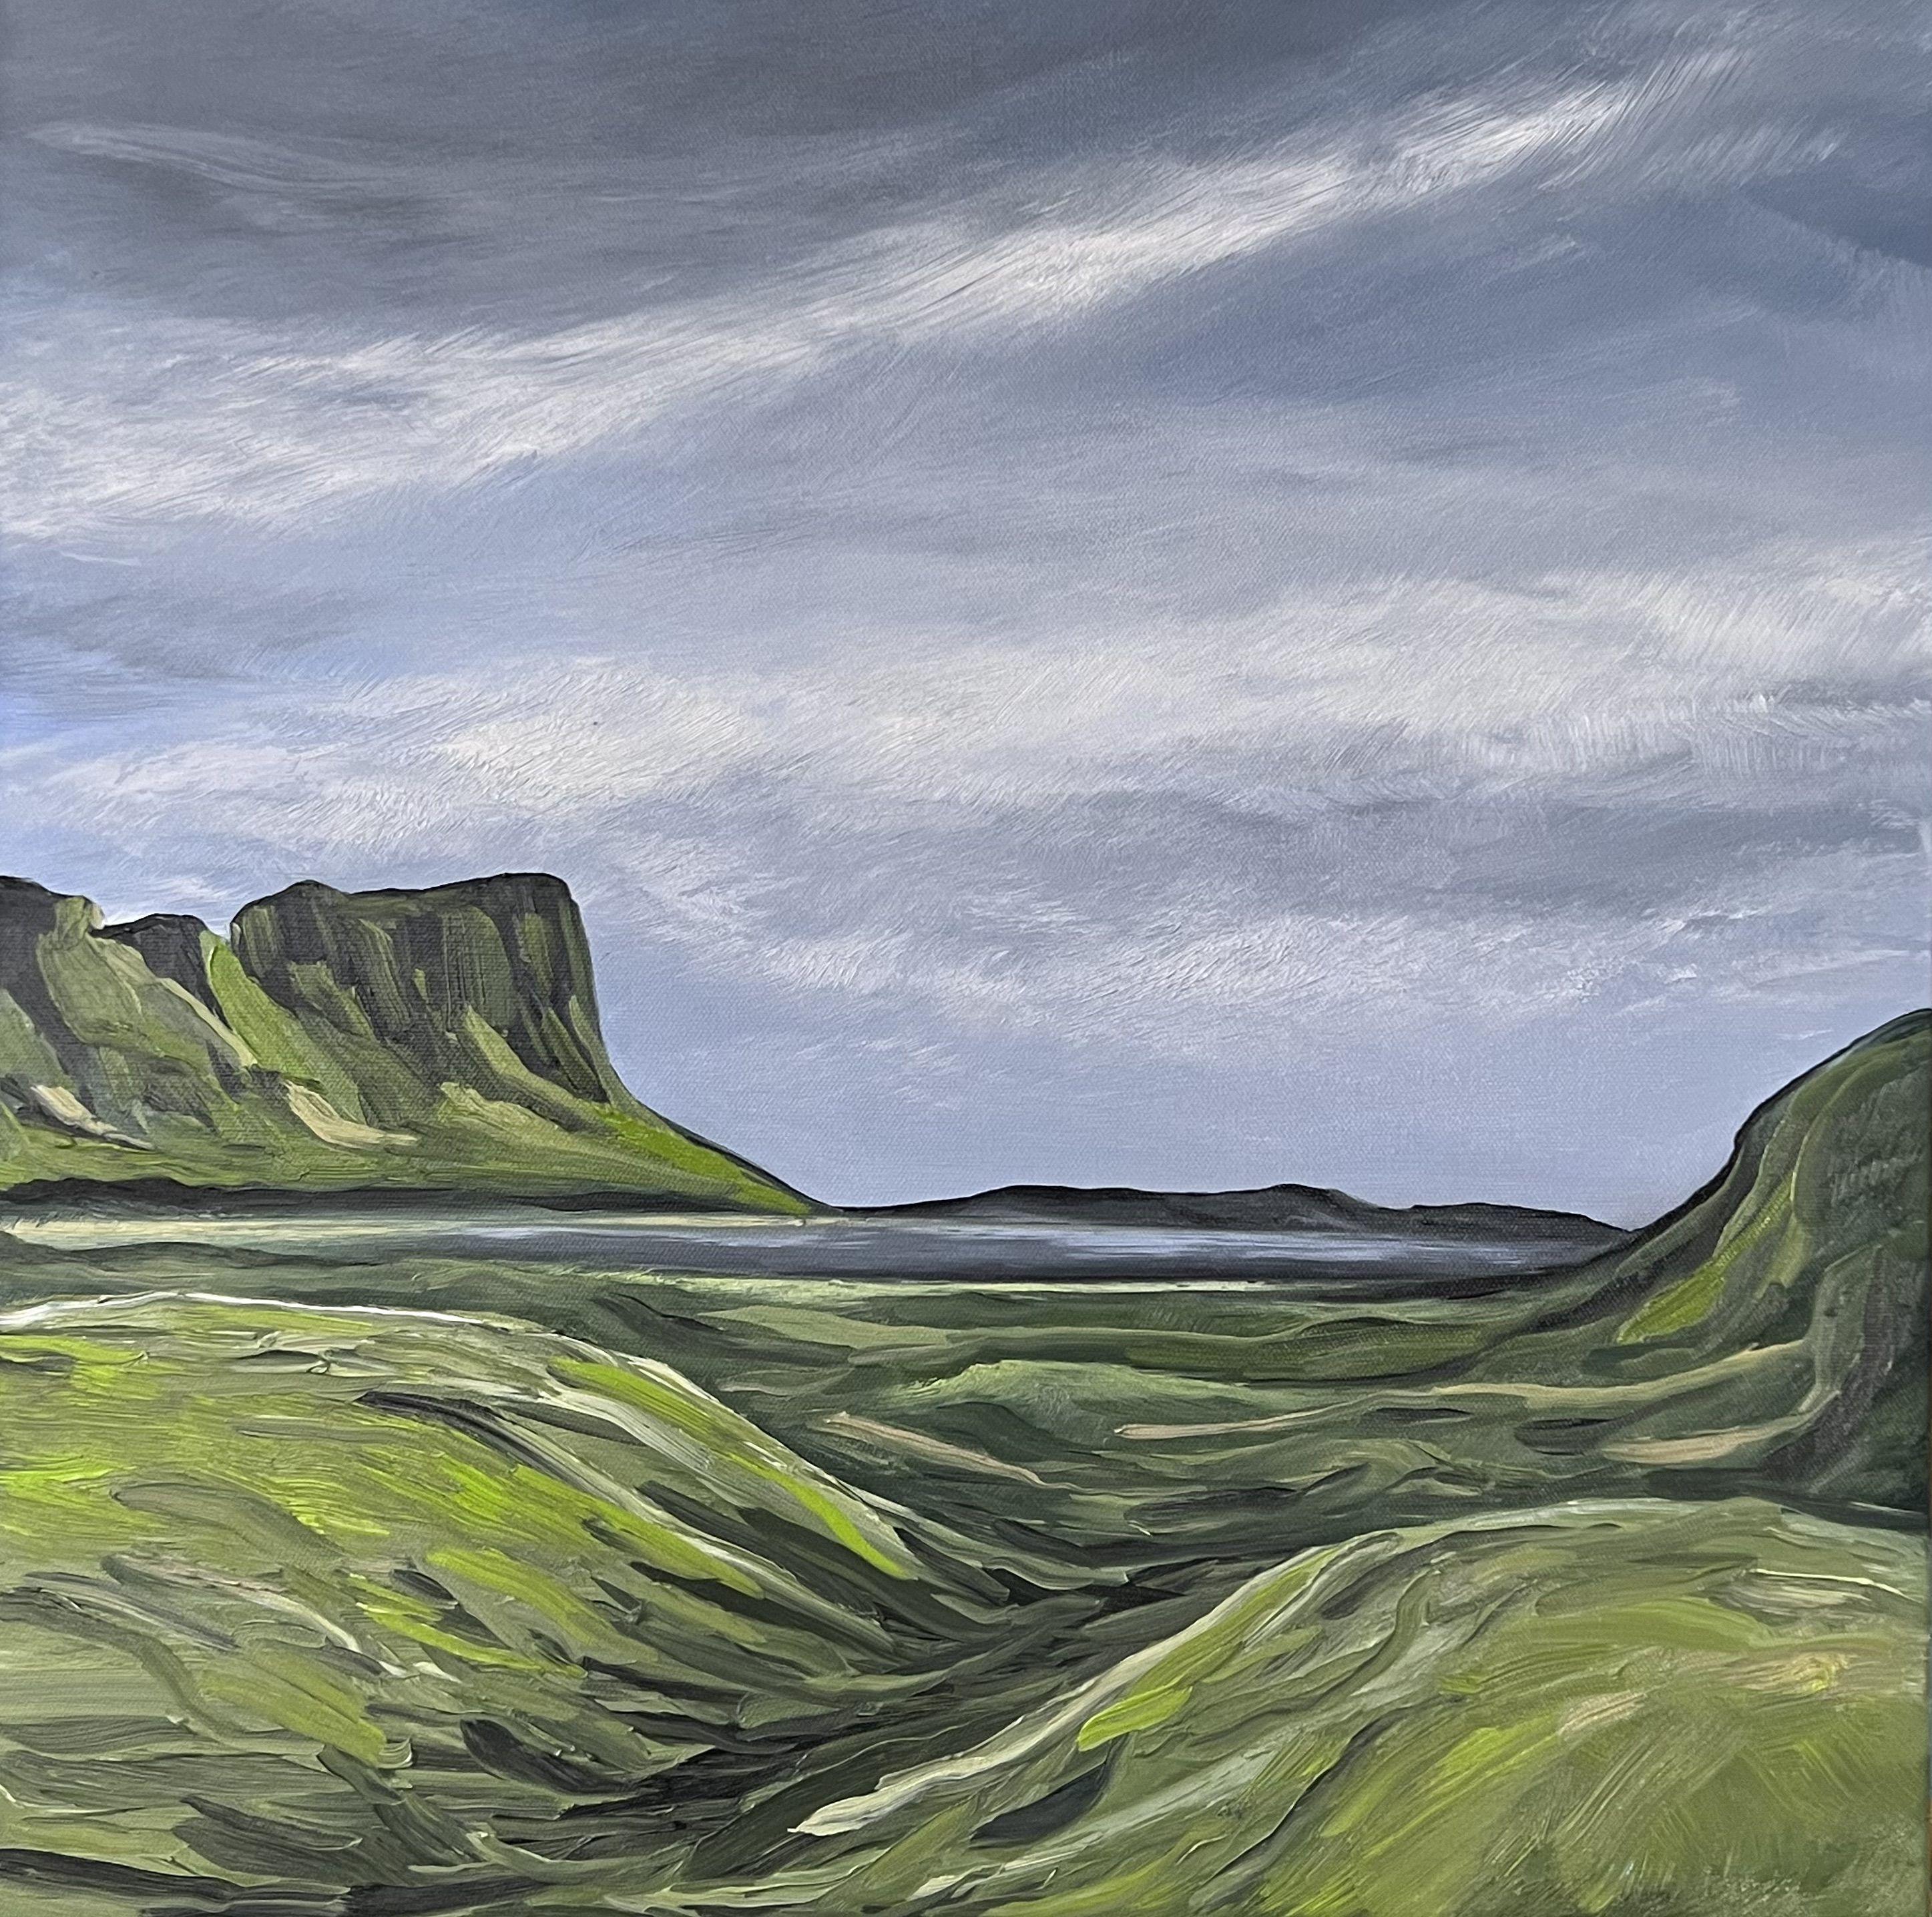 This painting was inspired by travels to Scotland and the Hebrides Islands. :: Painting :: Fine Art :: This piece comes with an official certificate of authenticity signed by the artist :: Ready to Hang: Yes :: Signed: Yes :: Signature Location: